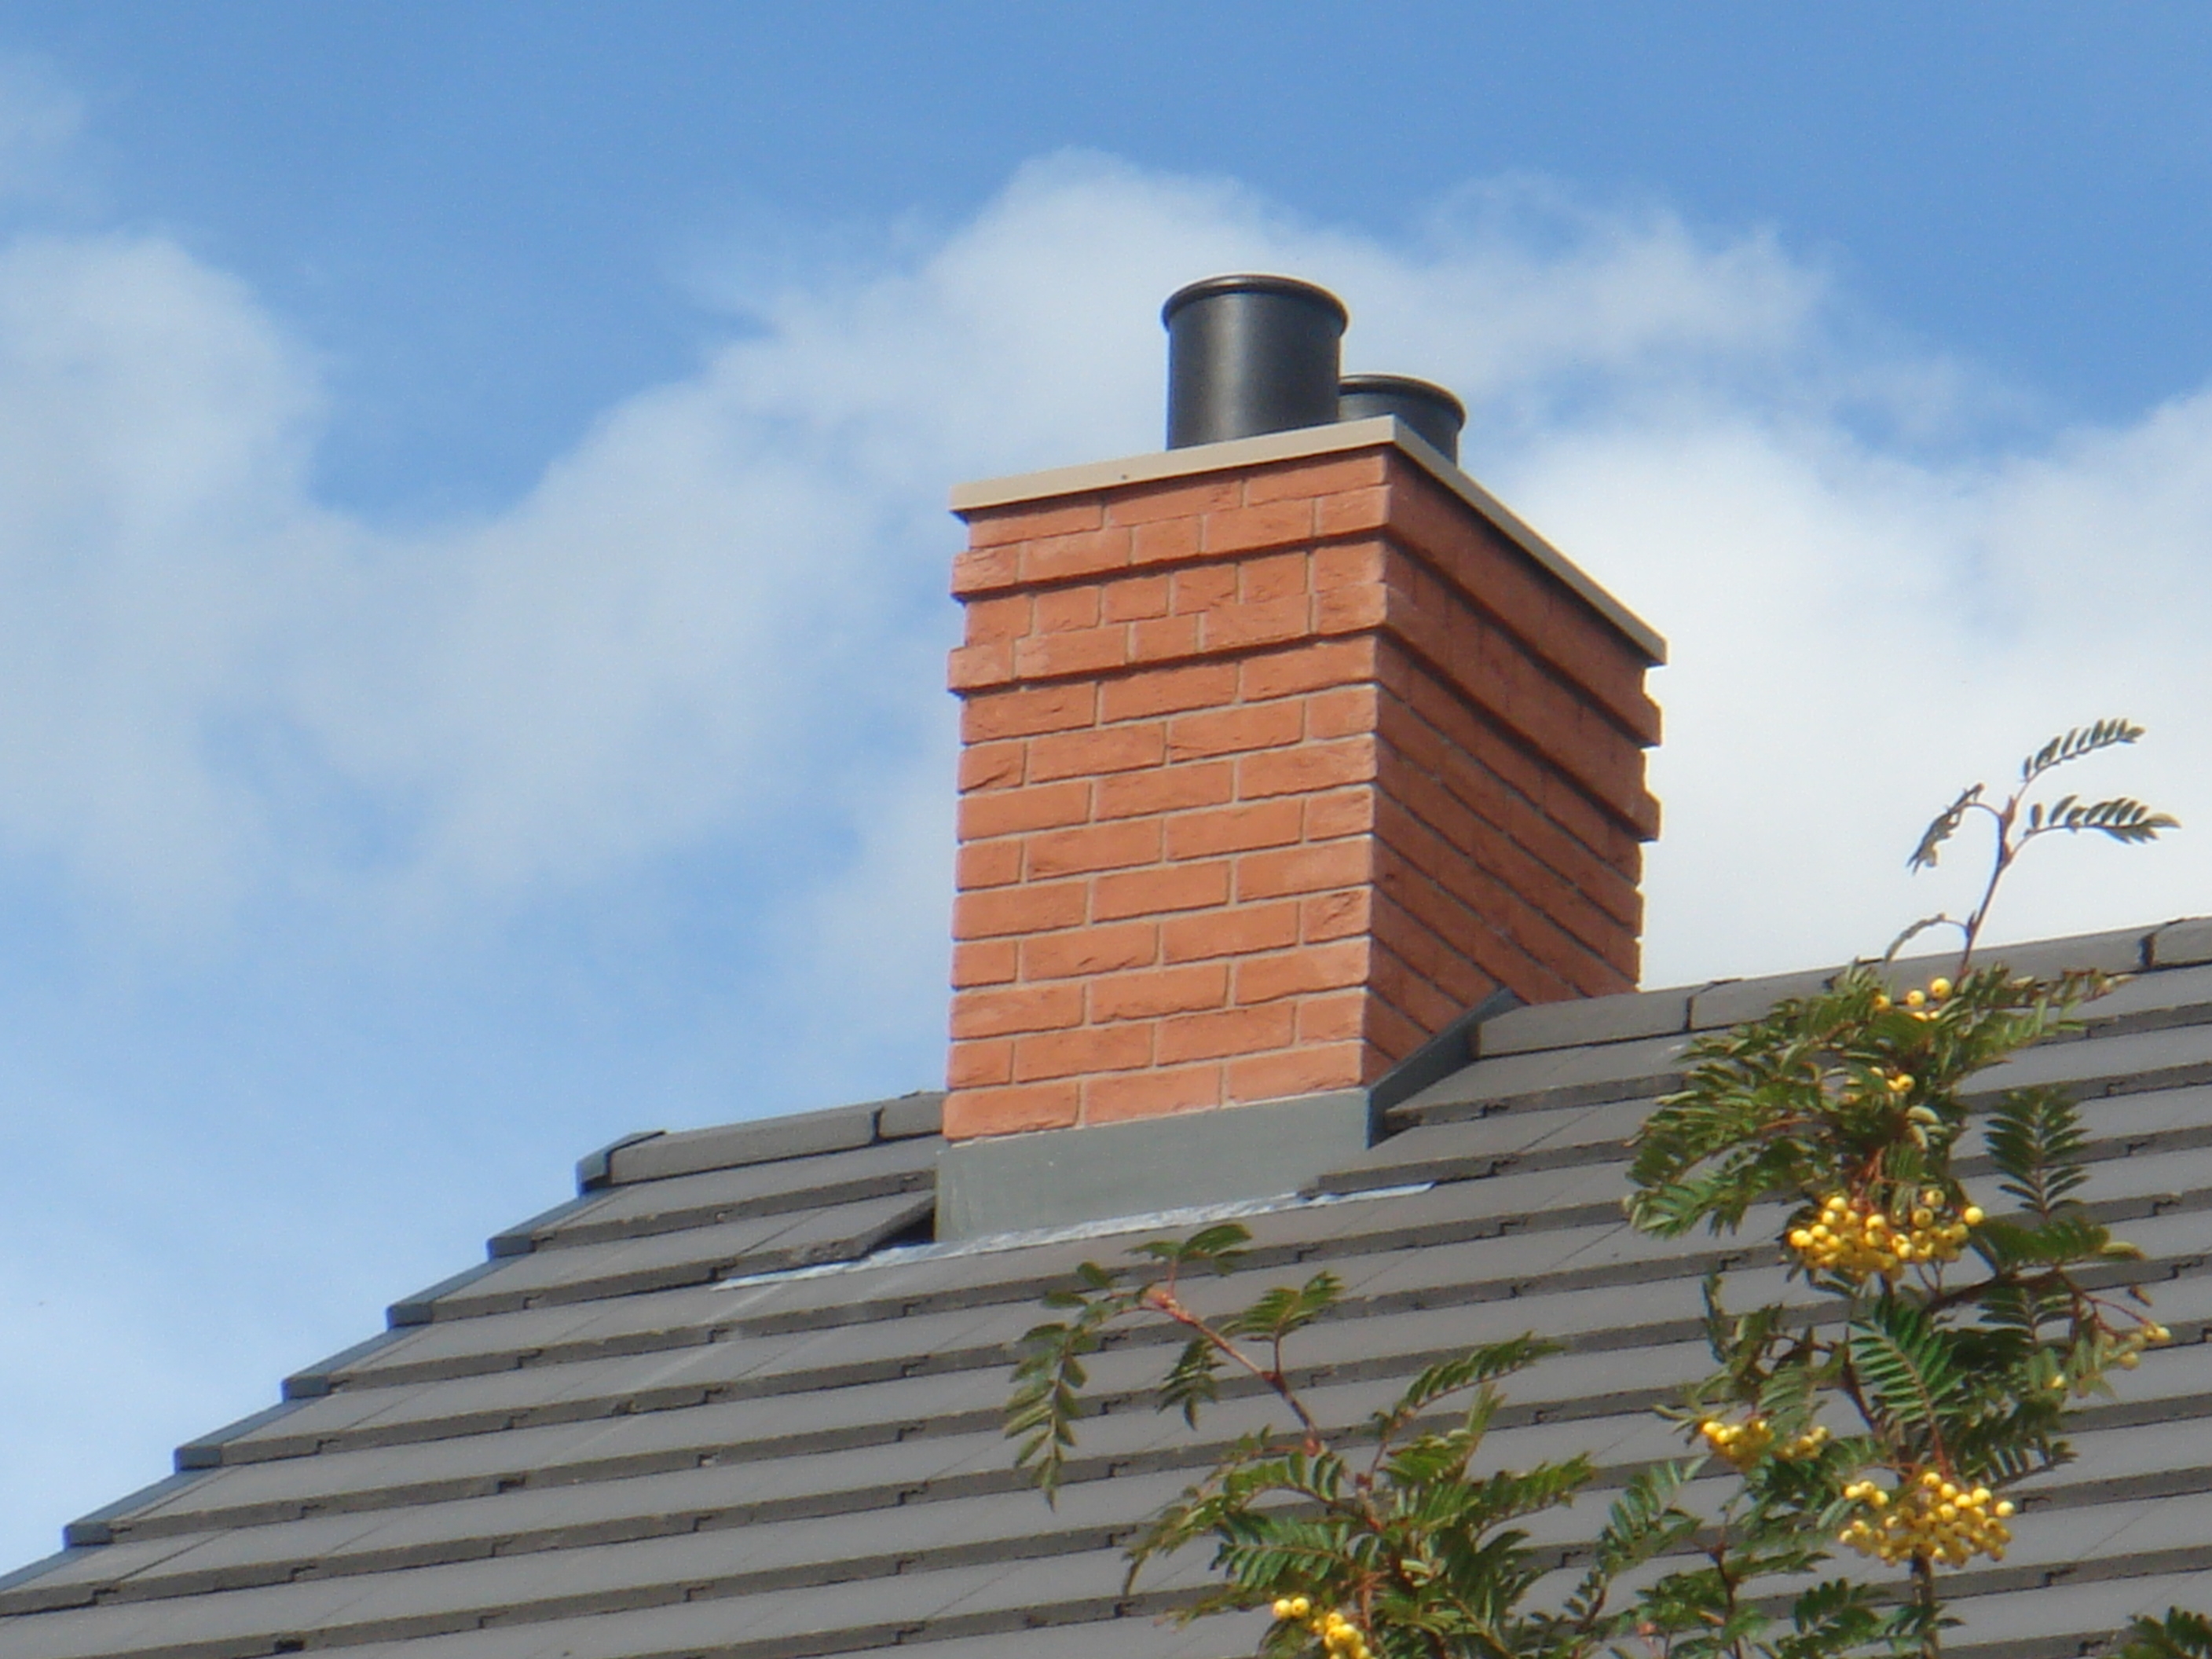 Chimney | Chimneys | Pinterest | Construction leads, Roofing ...